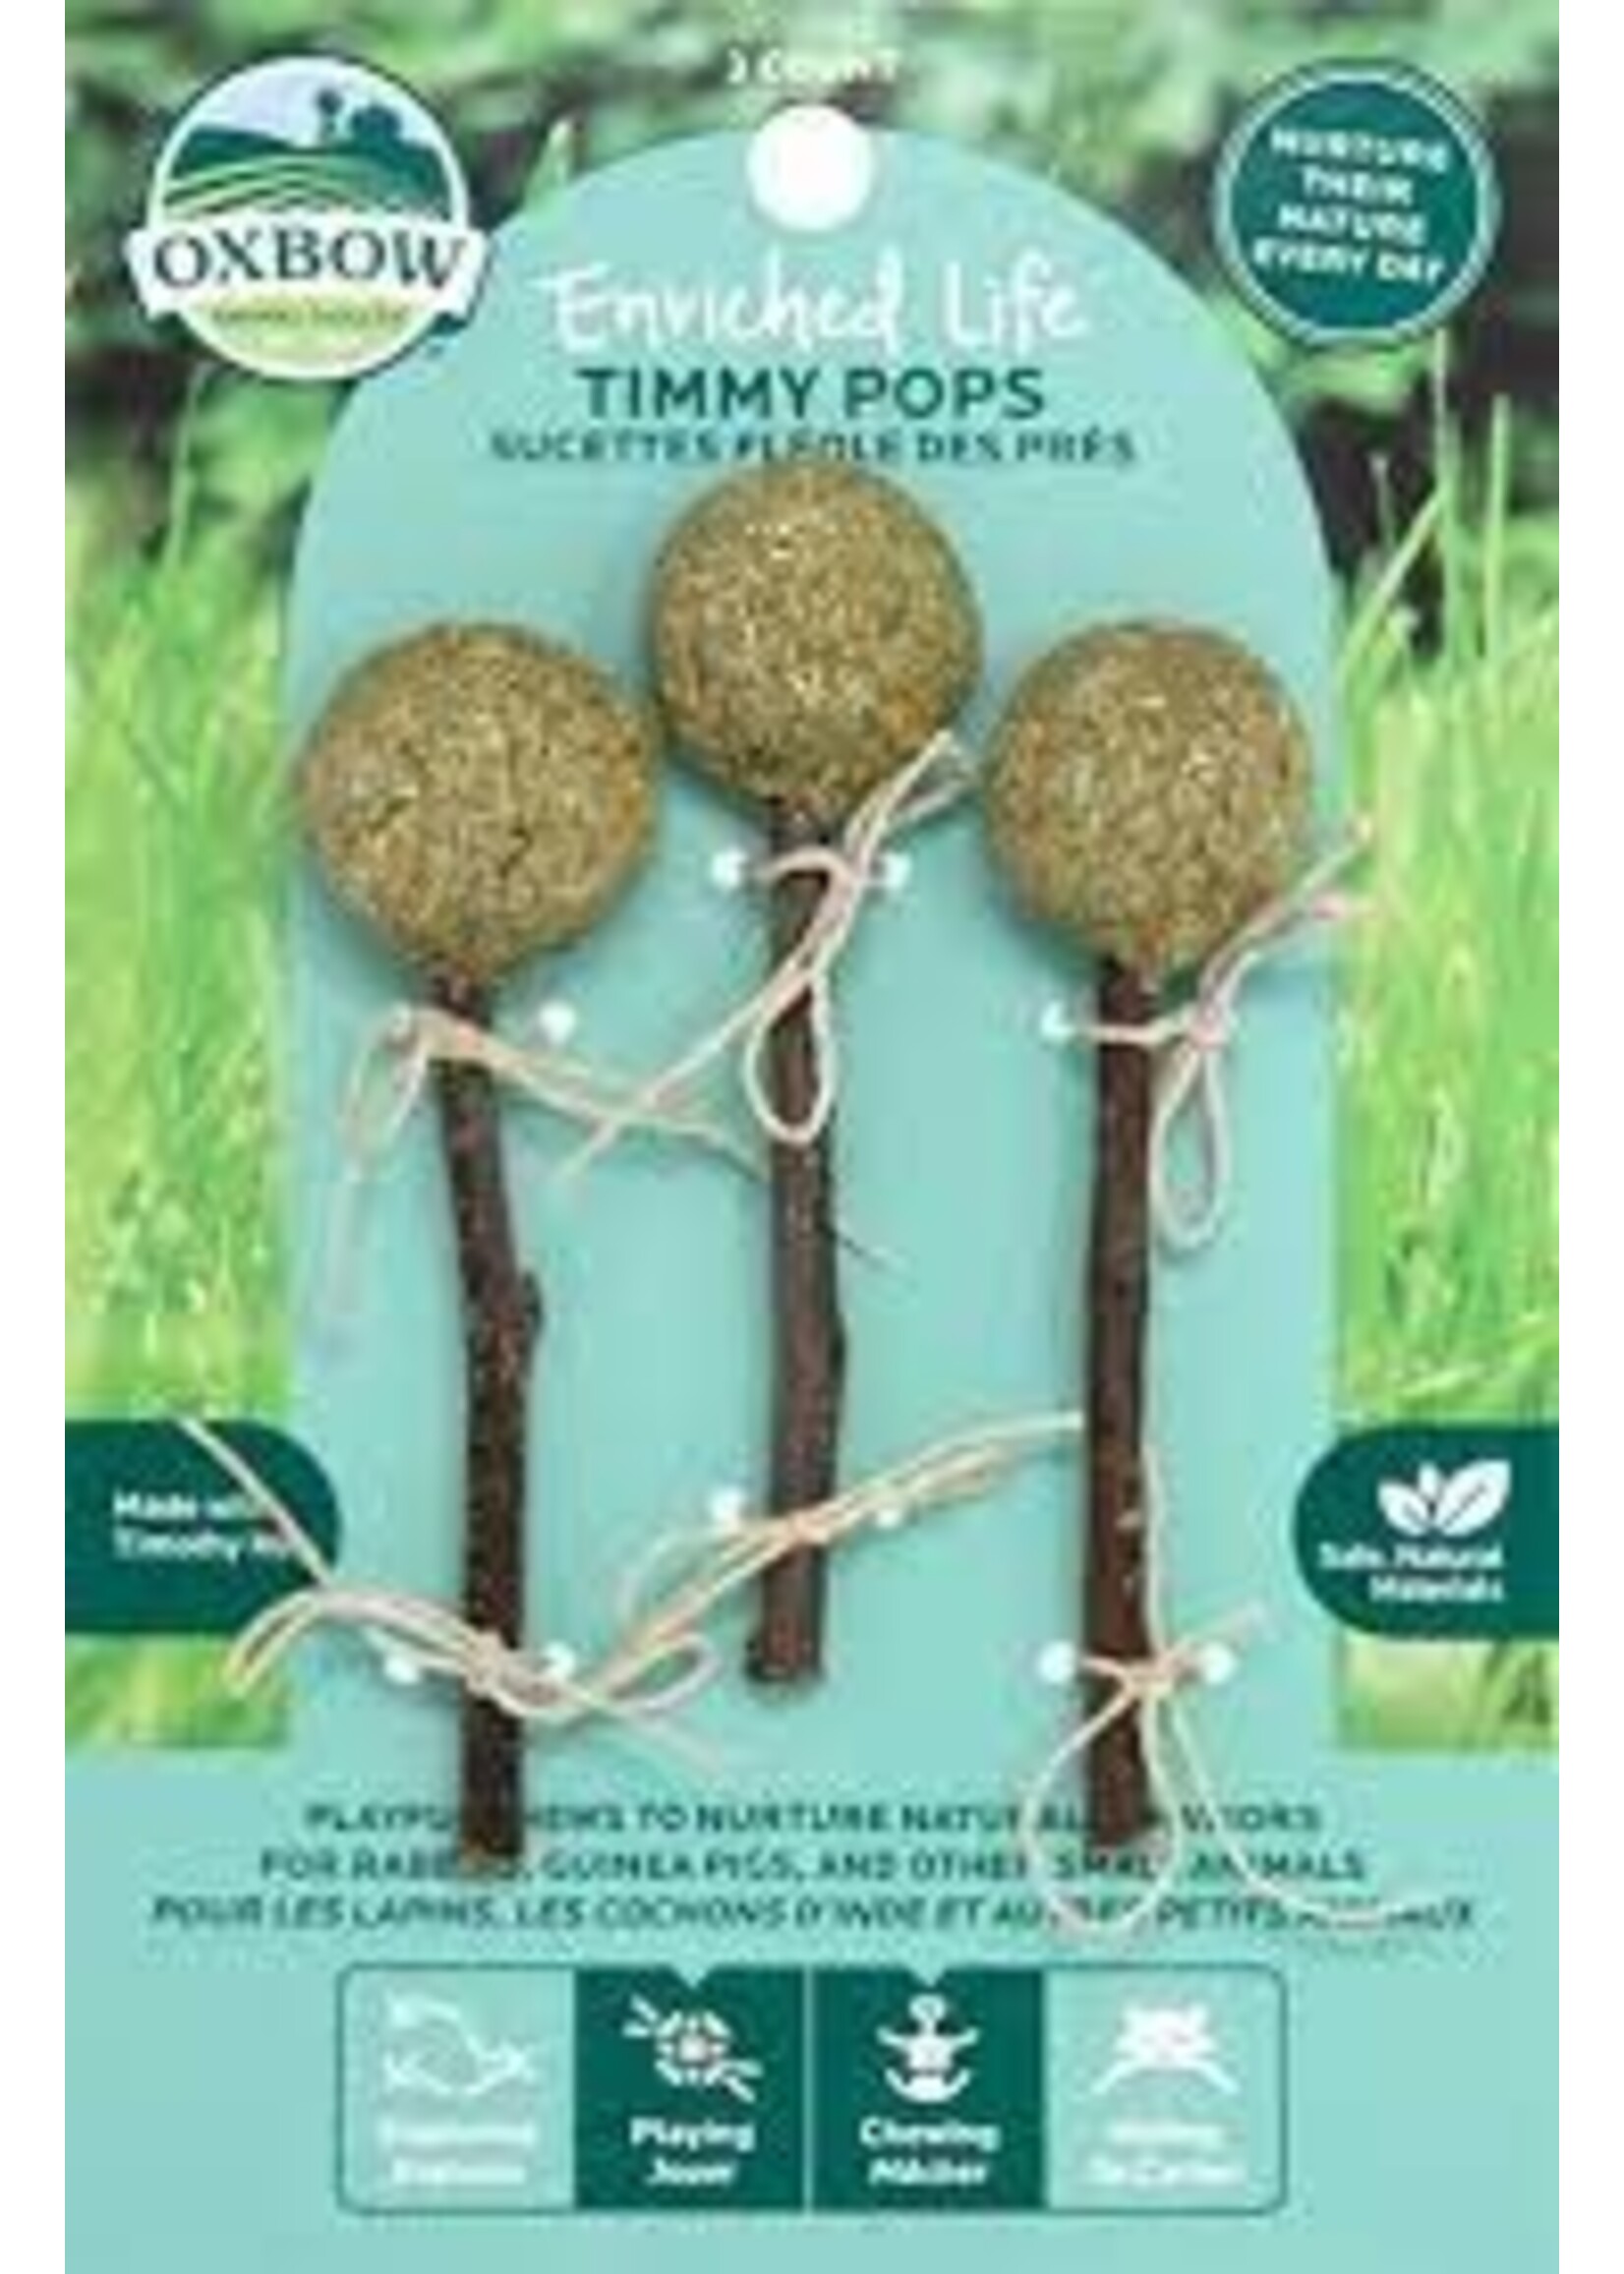 Oxbow Oxbow Enriched Life Timmy Pops